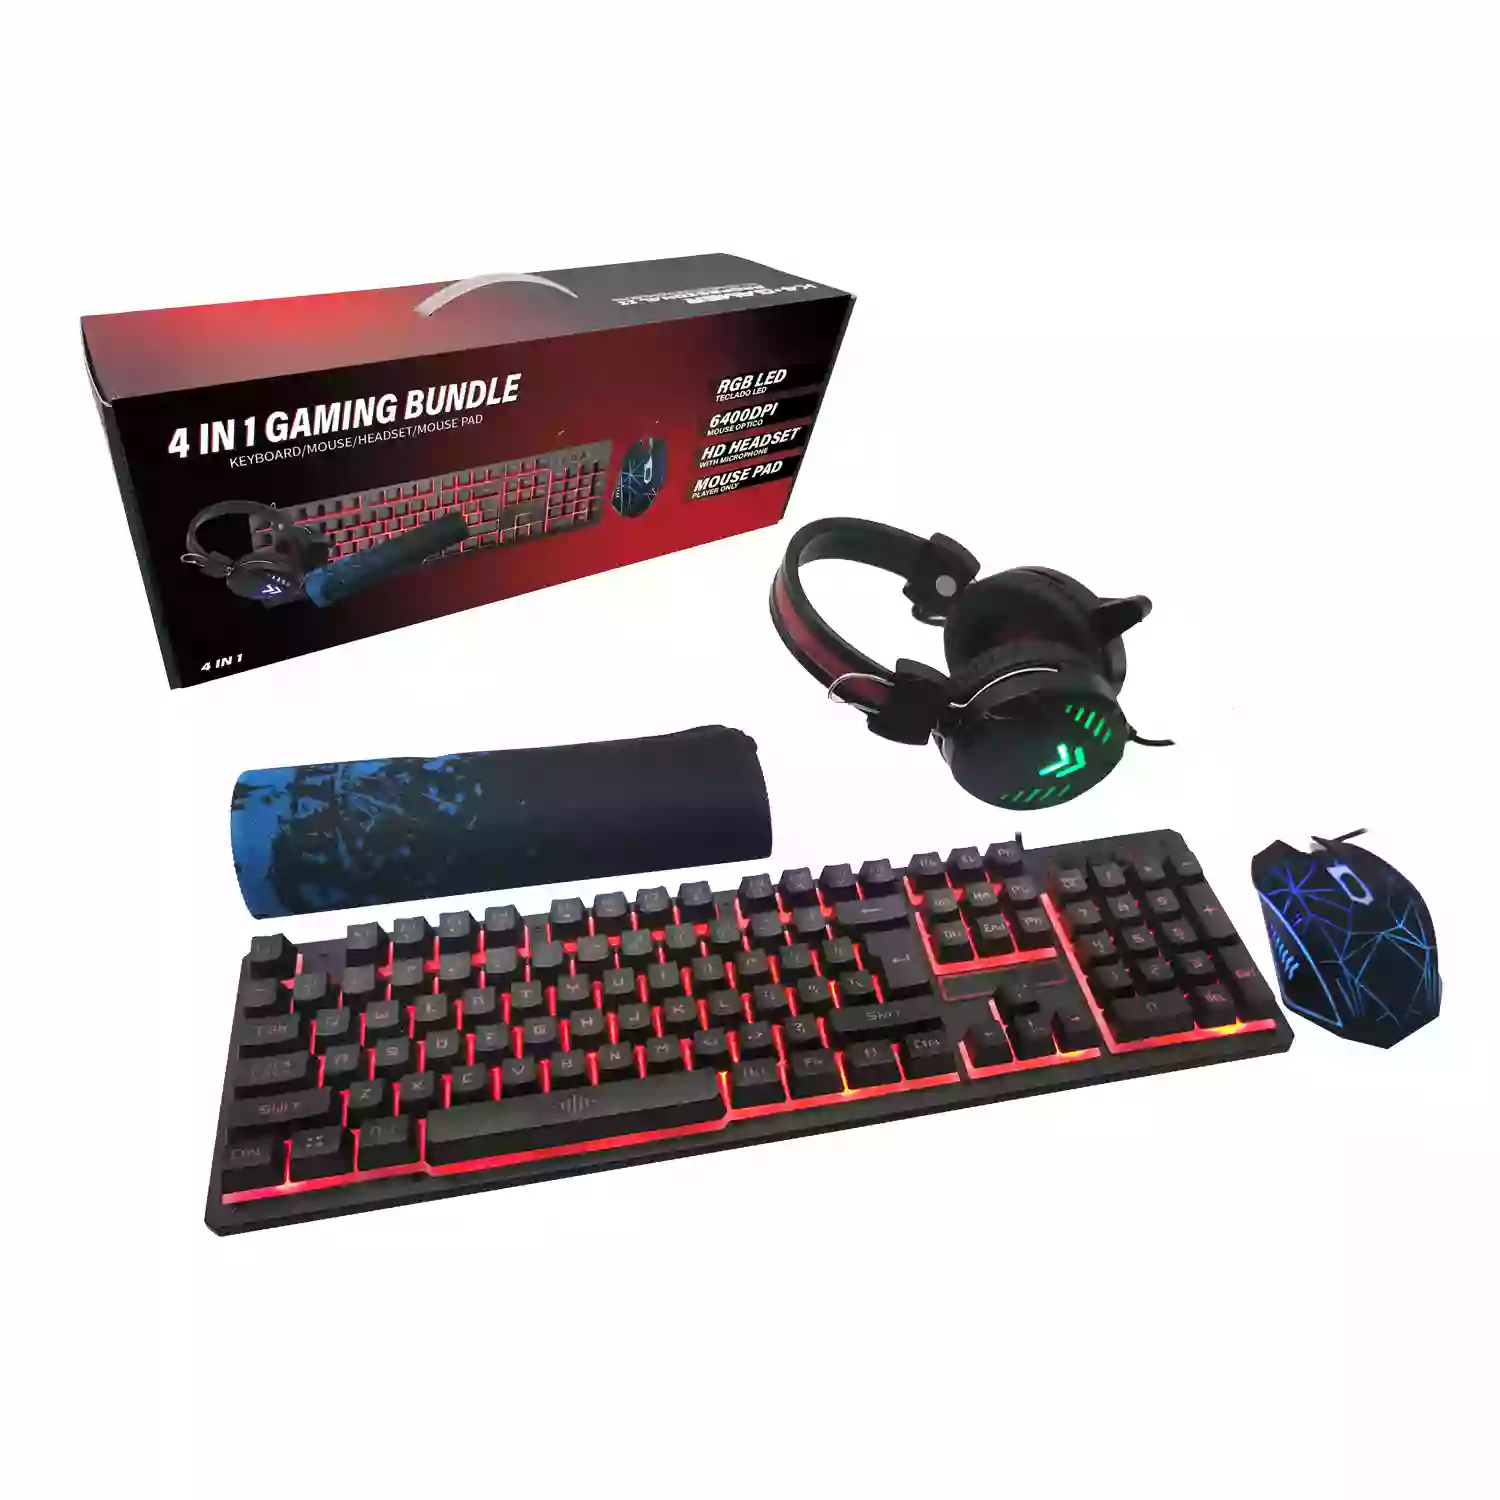 4 in 1 RGB Gaming Bundle Keyboard_Mouse_Mouse Pad_Headset for Gamers